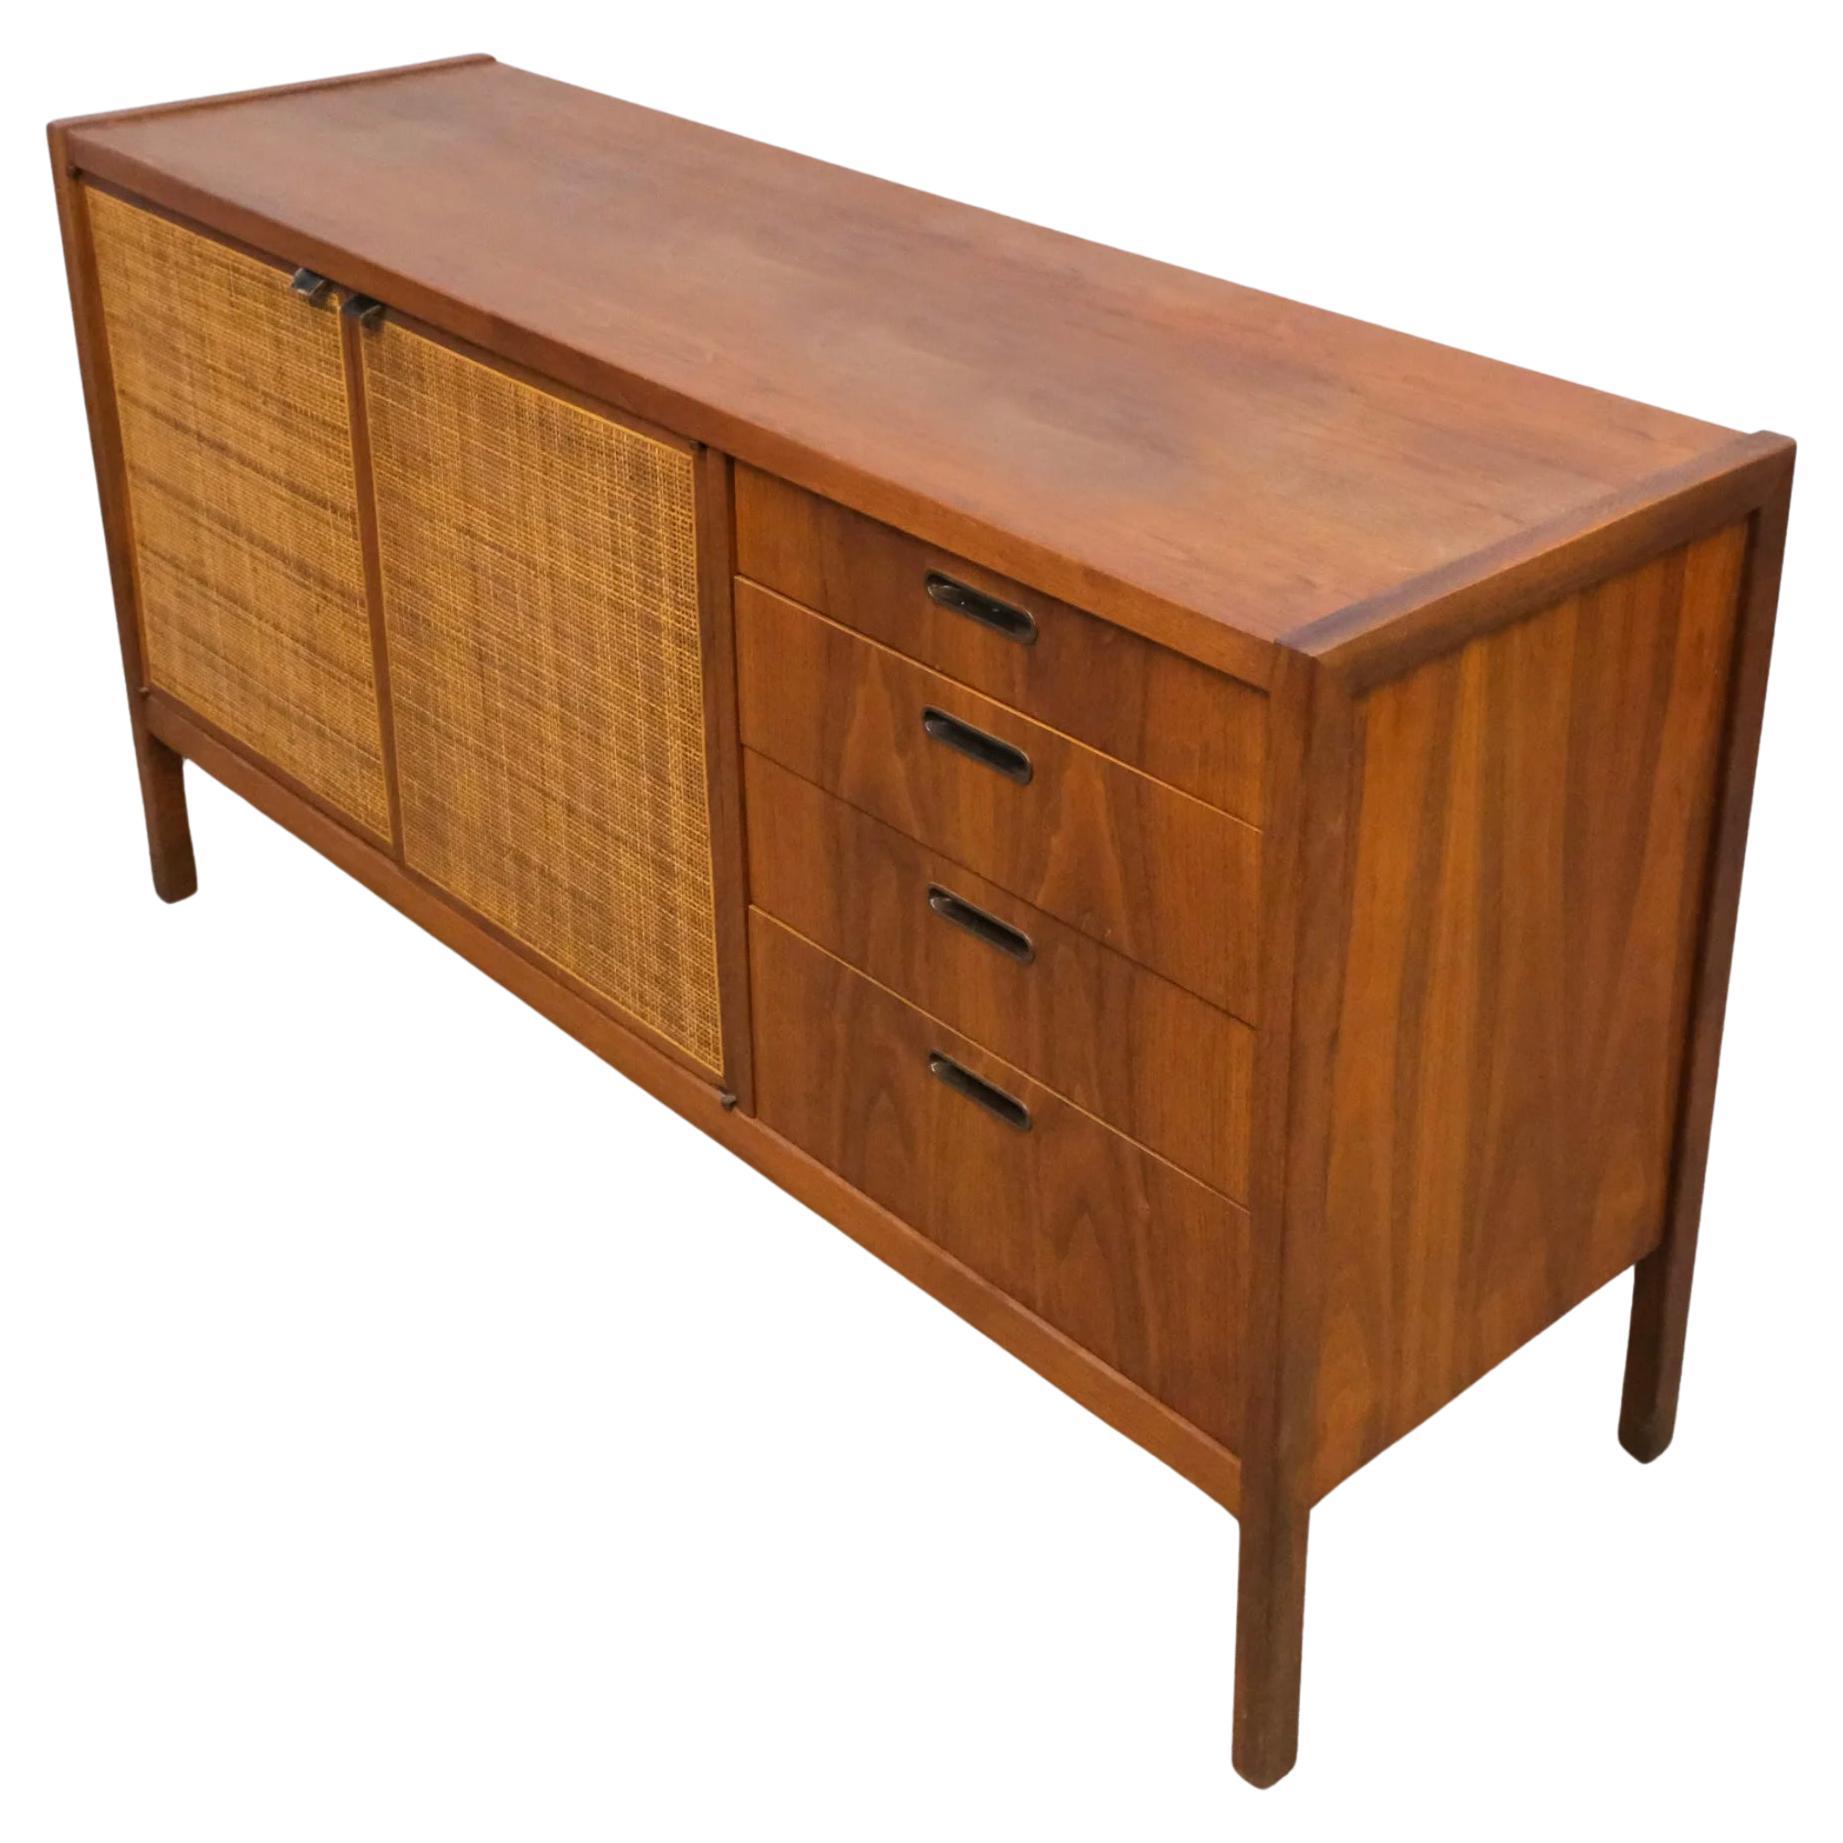 Mid century modern credenza sideboard with two caned cabinet doors and four drawers. The top drawer is fitted for Flatware/silverware. Behind the cabinet doors is an adjustable shelf. Beautiful woodgrain and high quality woodwork. Made in USA circa